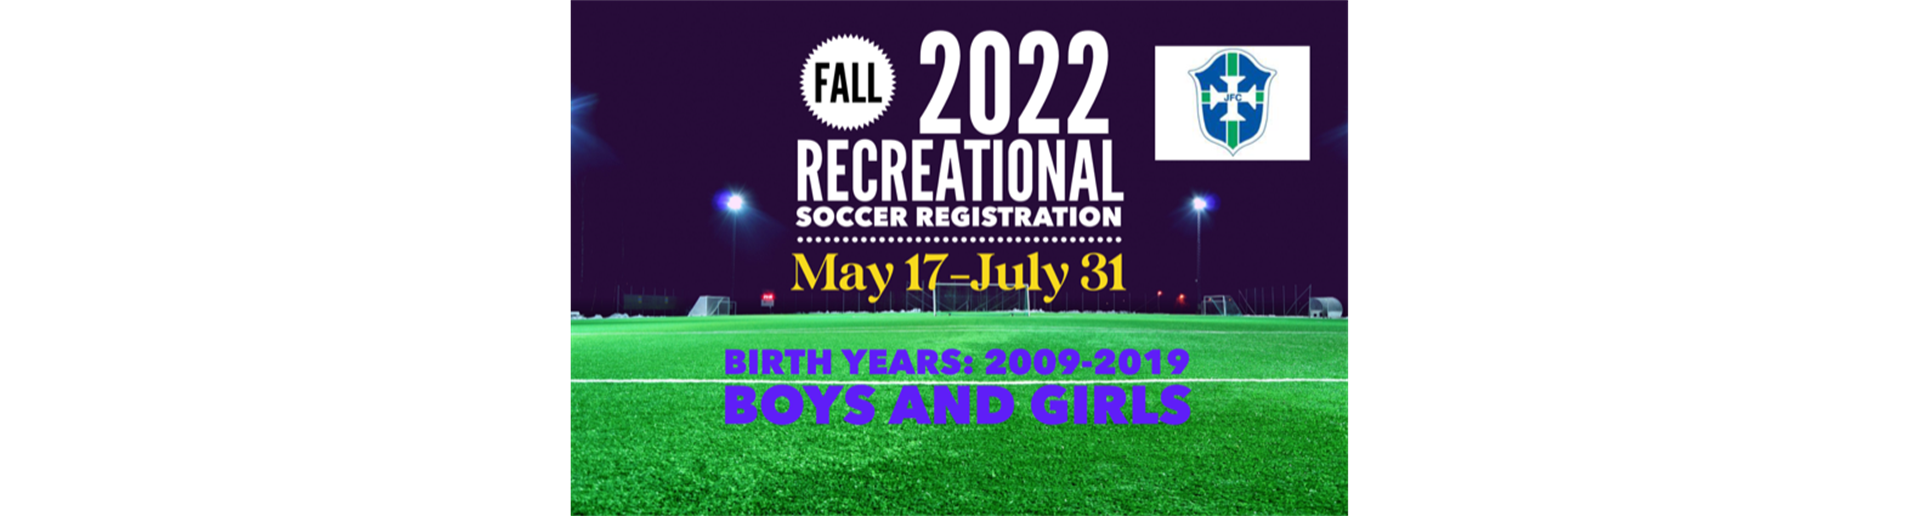 Fall 2022 Recreational Soccer - OPENS May 17-July 31!